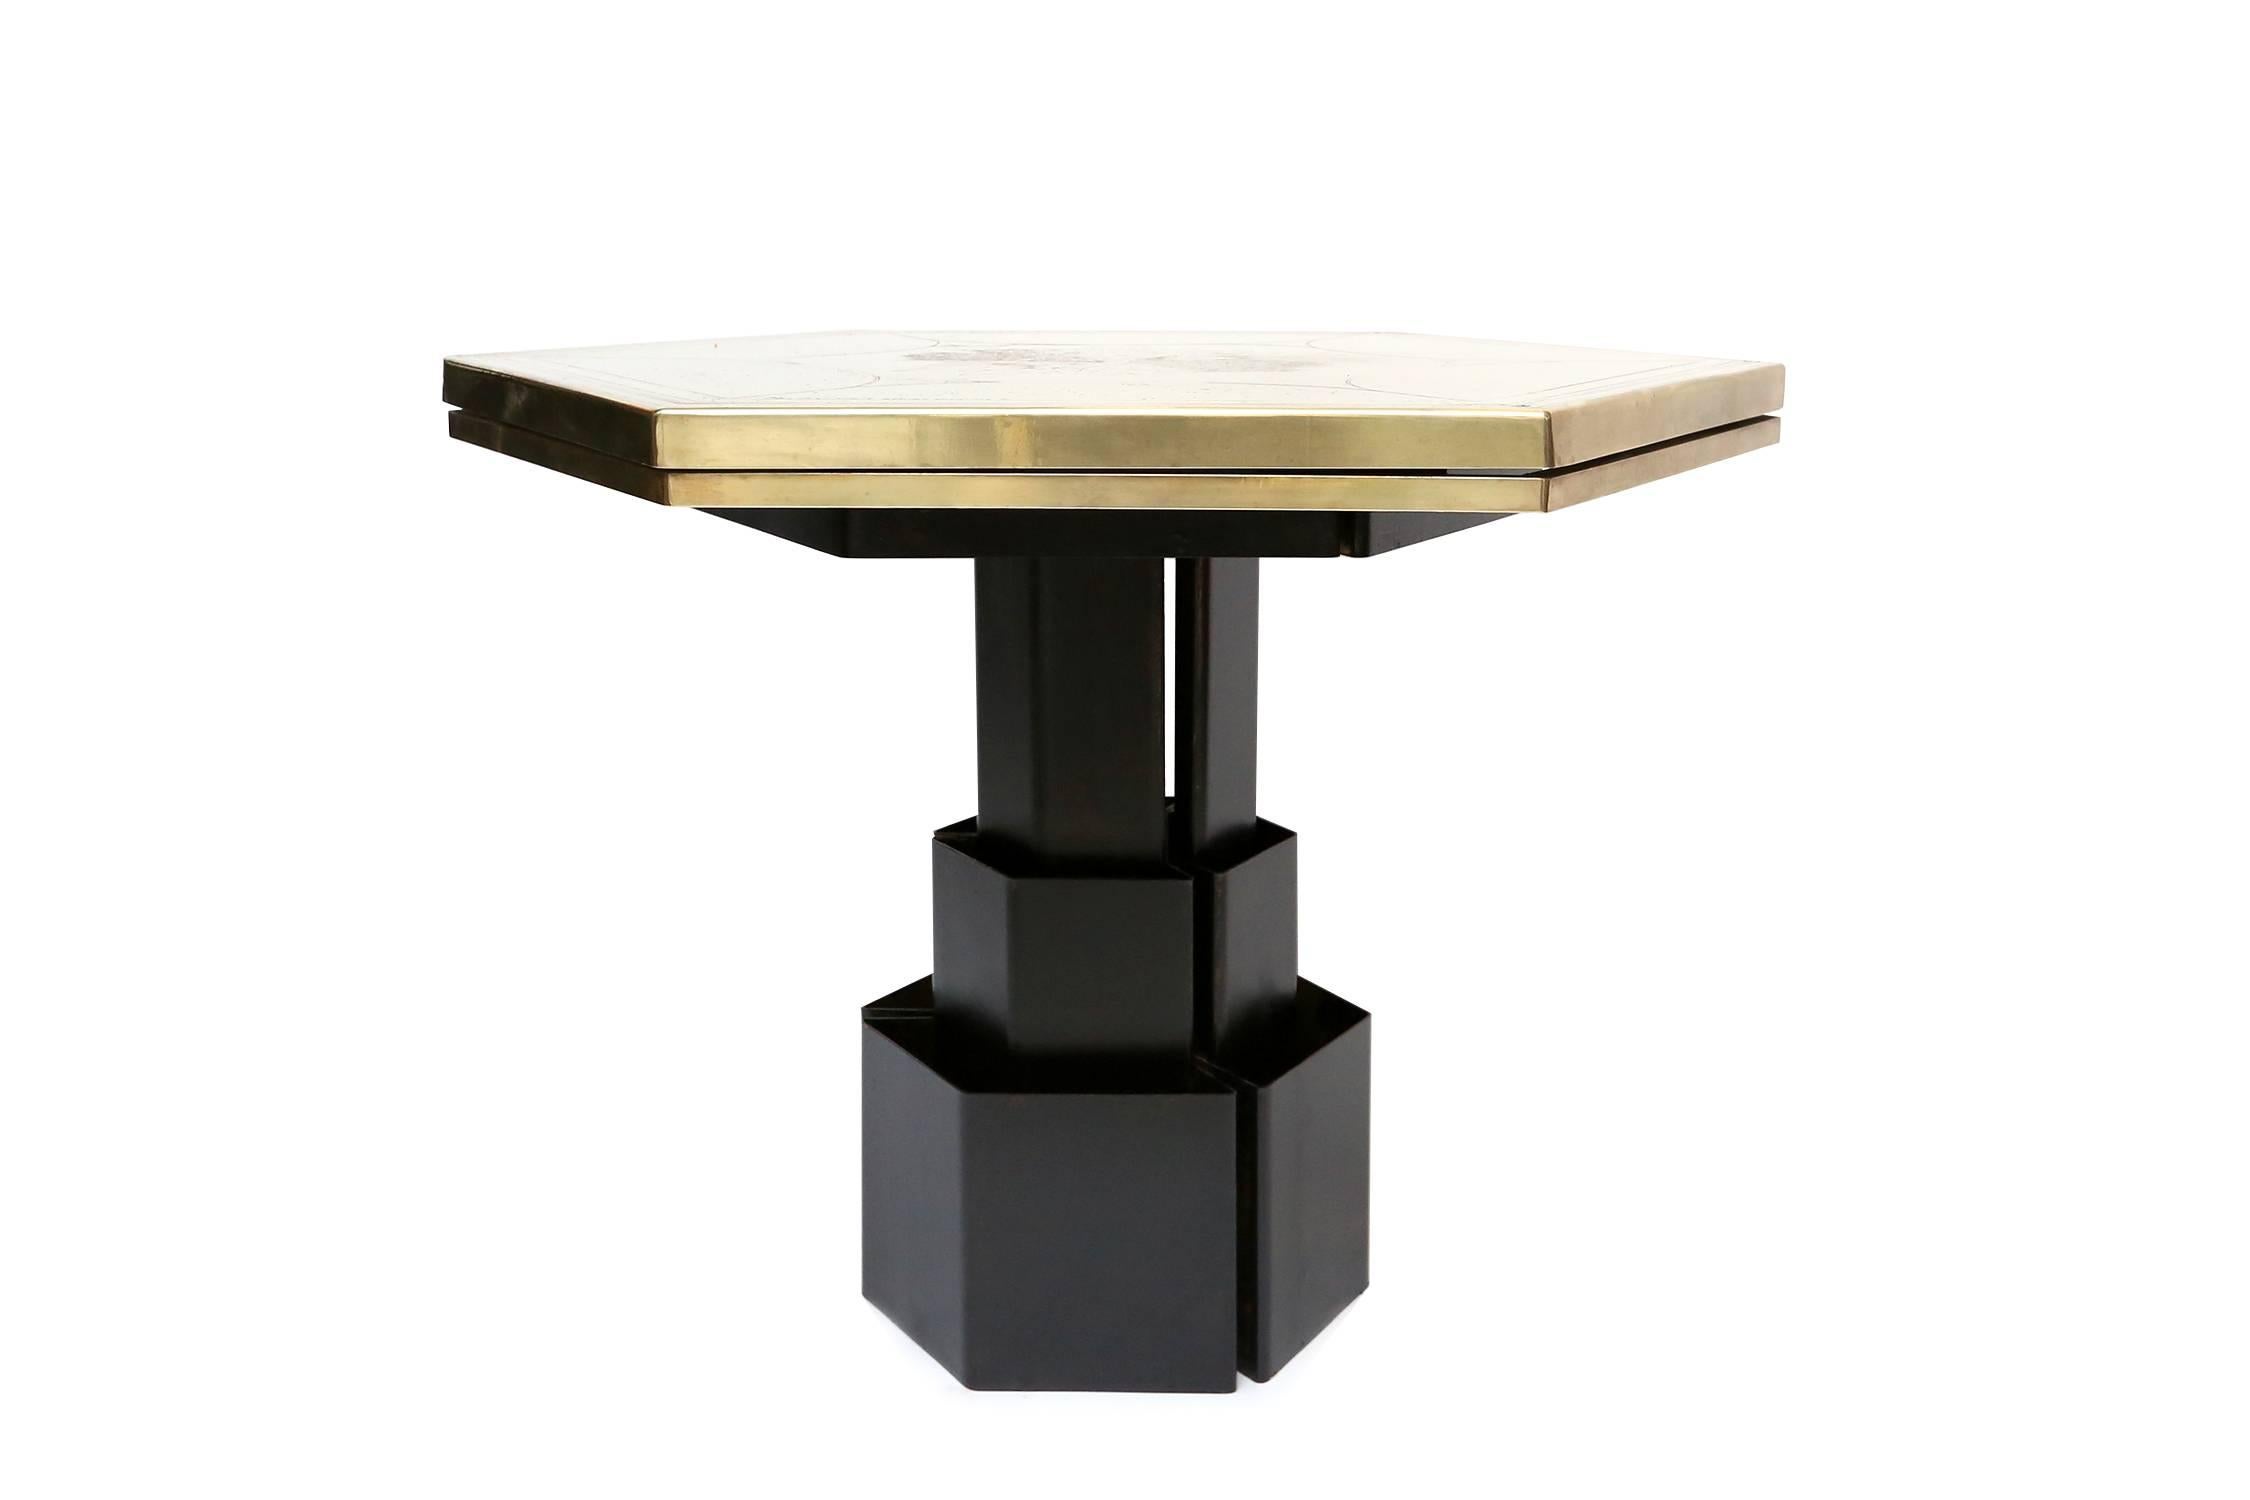 Mid-century modernl etched brass table by Christian Heckscher.
Brass black lacquered metal base,
Belgium, 1980s.

The artist now lives in the USA and only has high end customers
Measures: Ø 100 cm, H 75 cm.